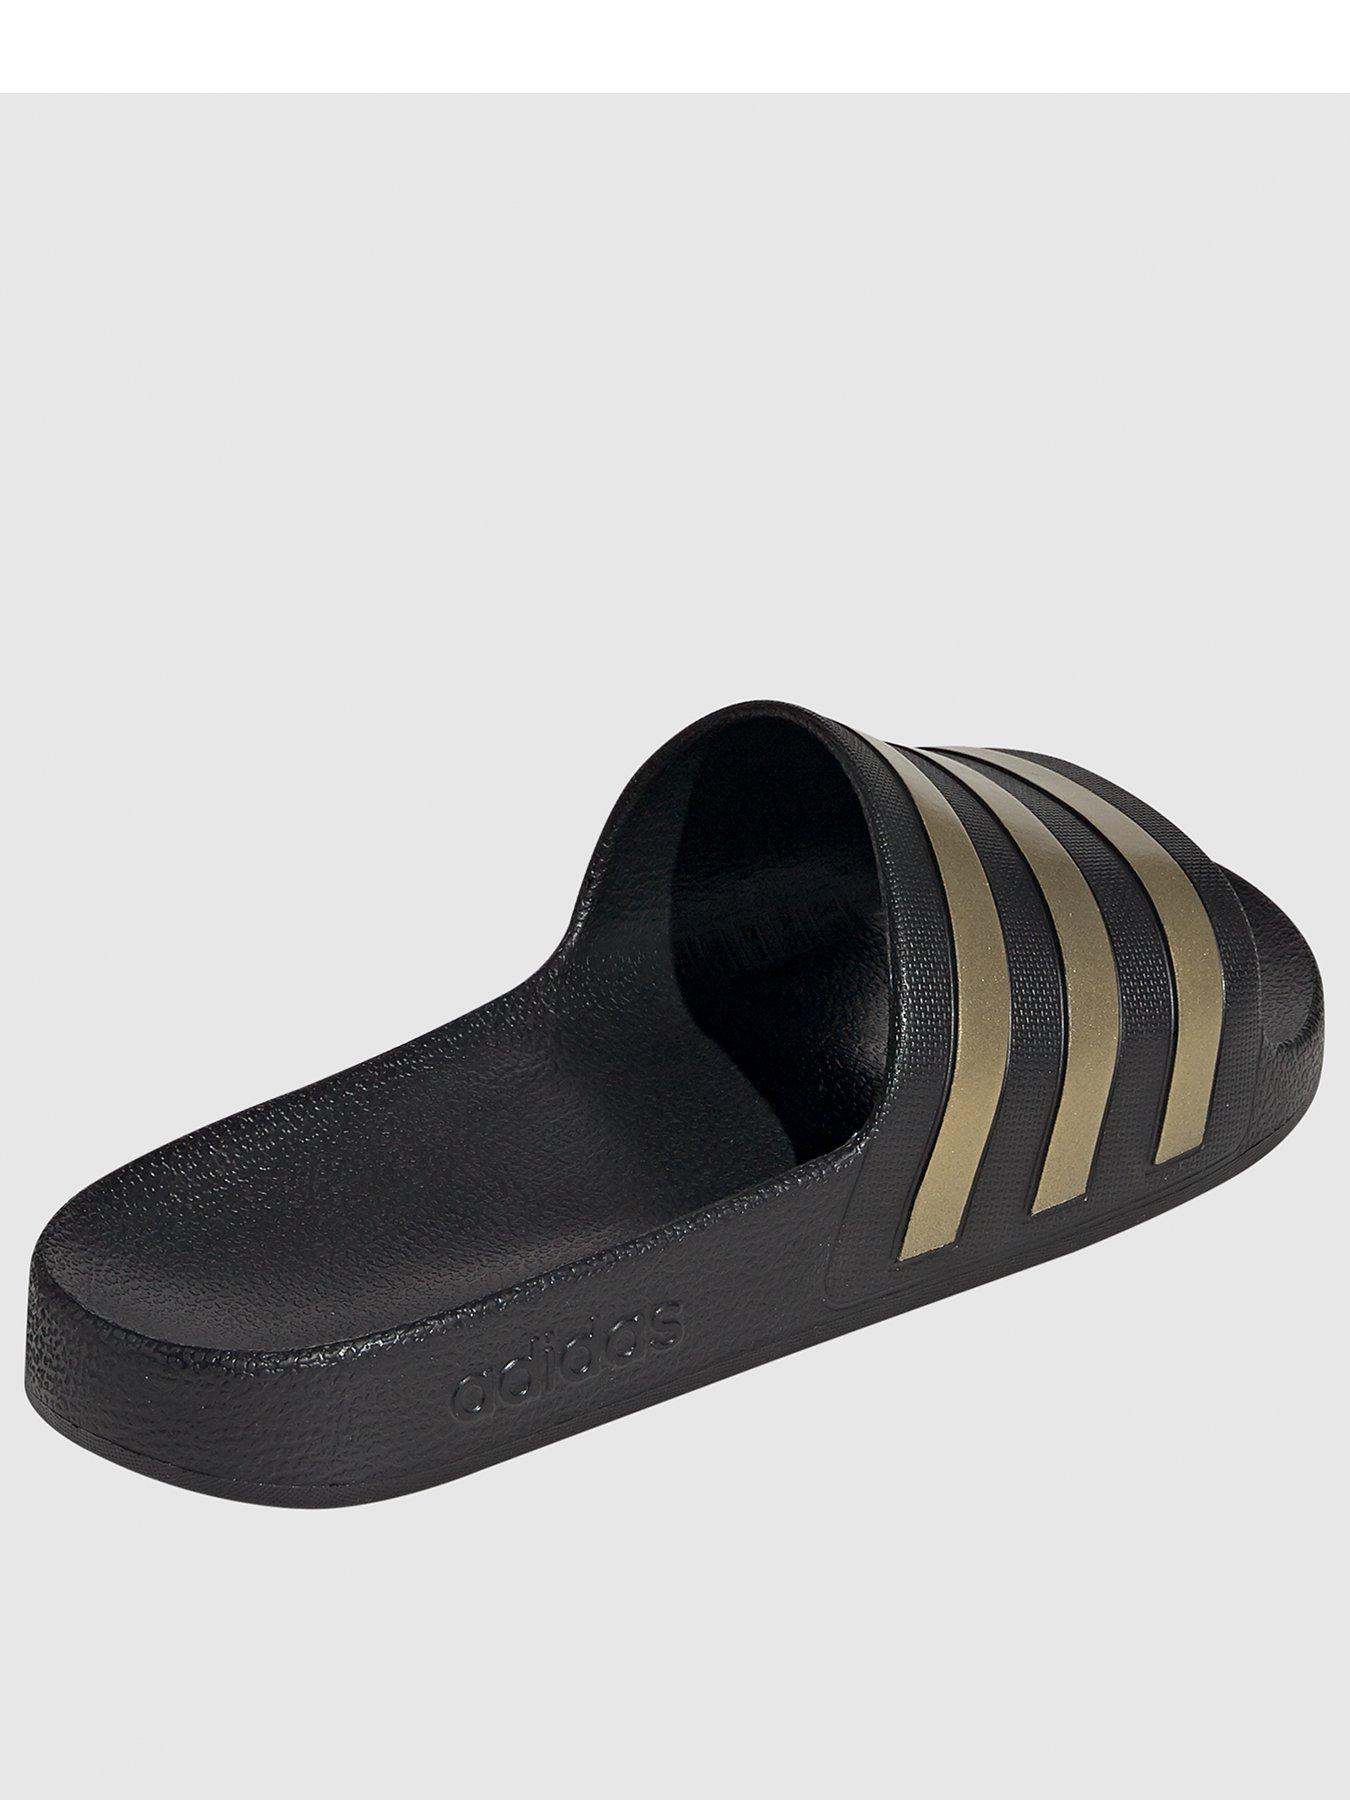 adidas black and gold sliders